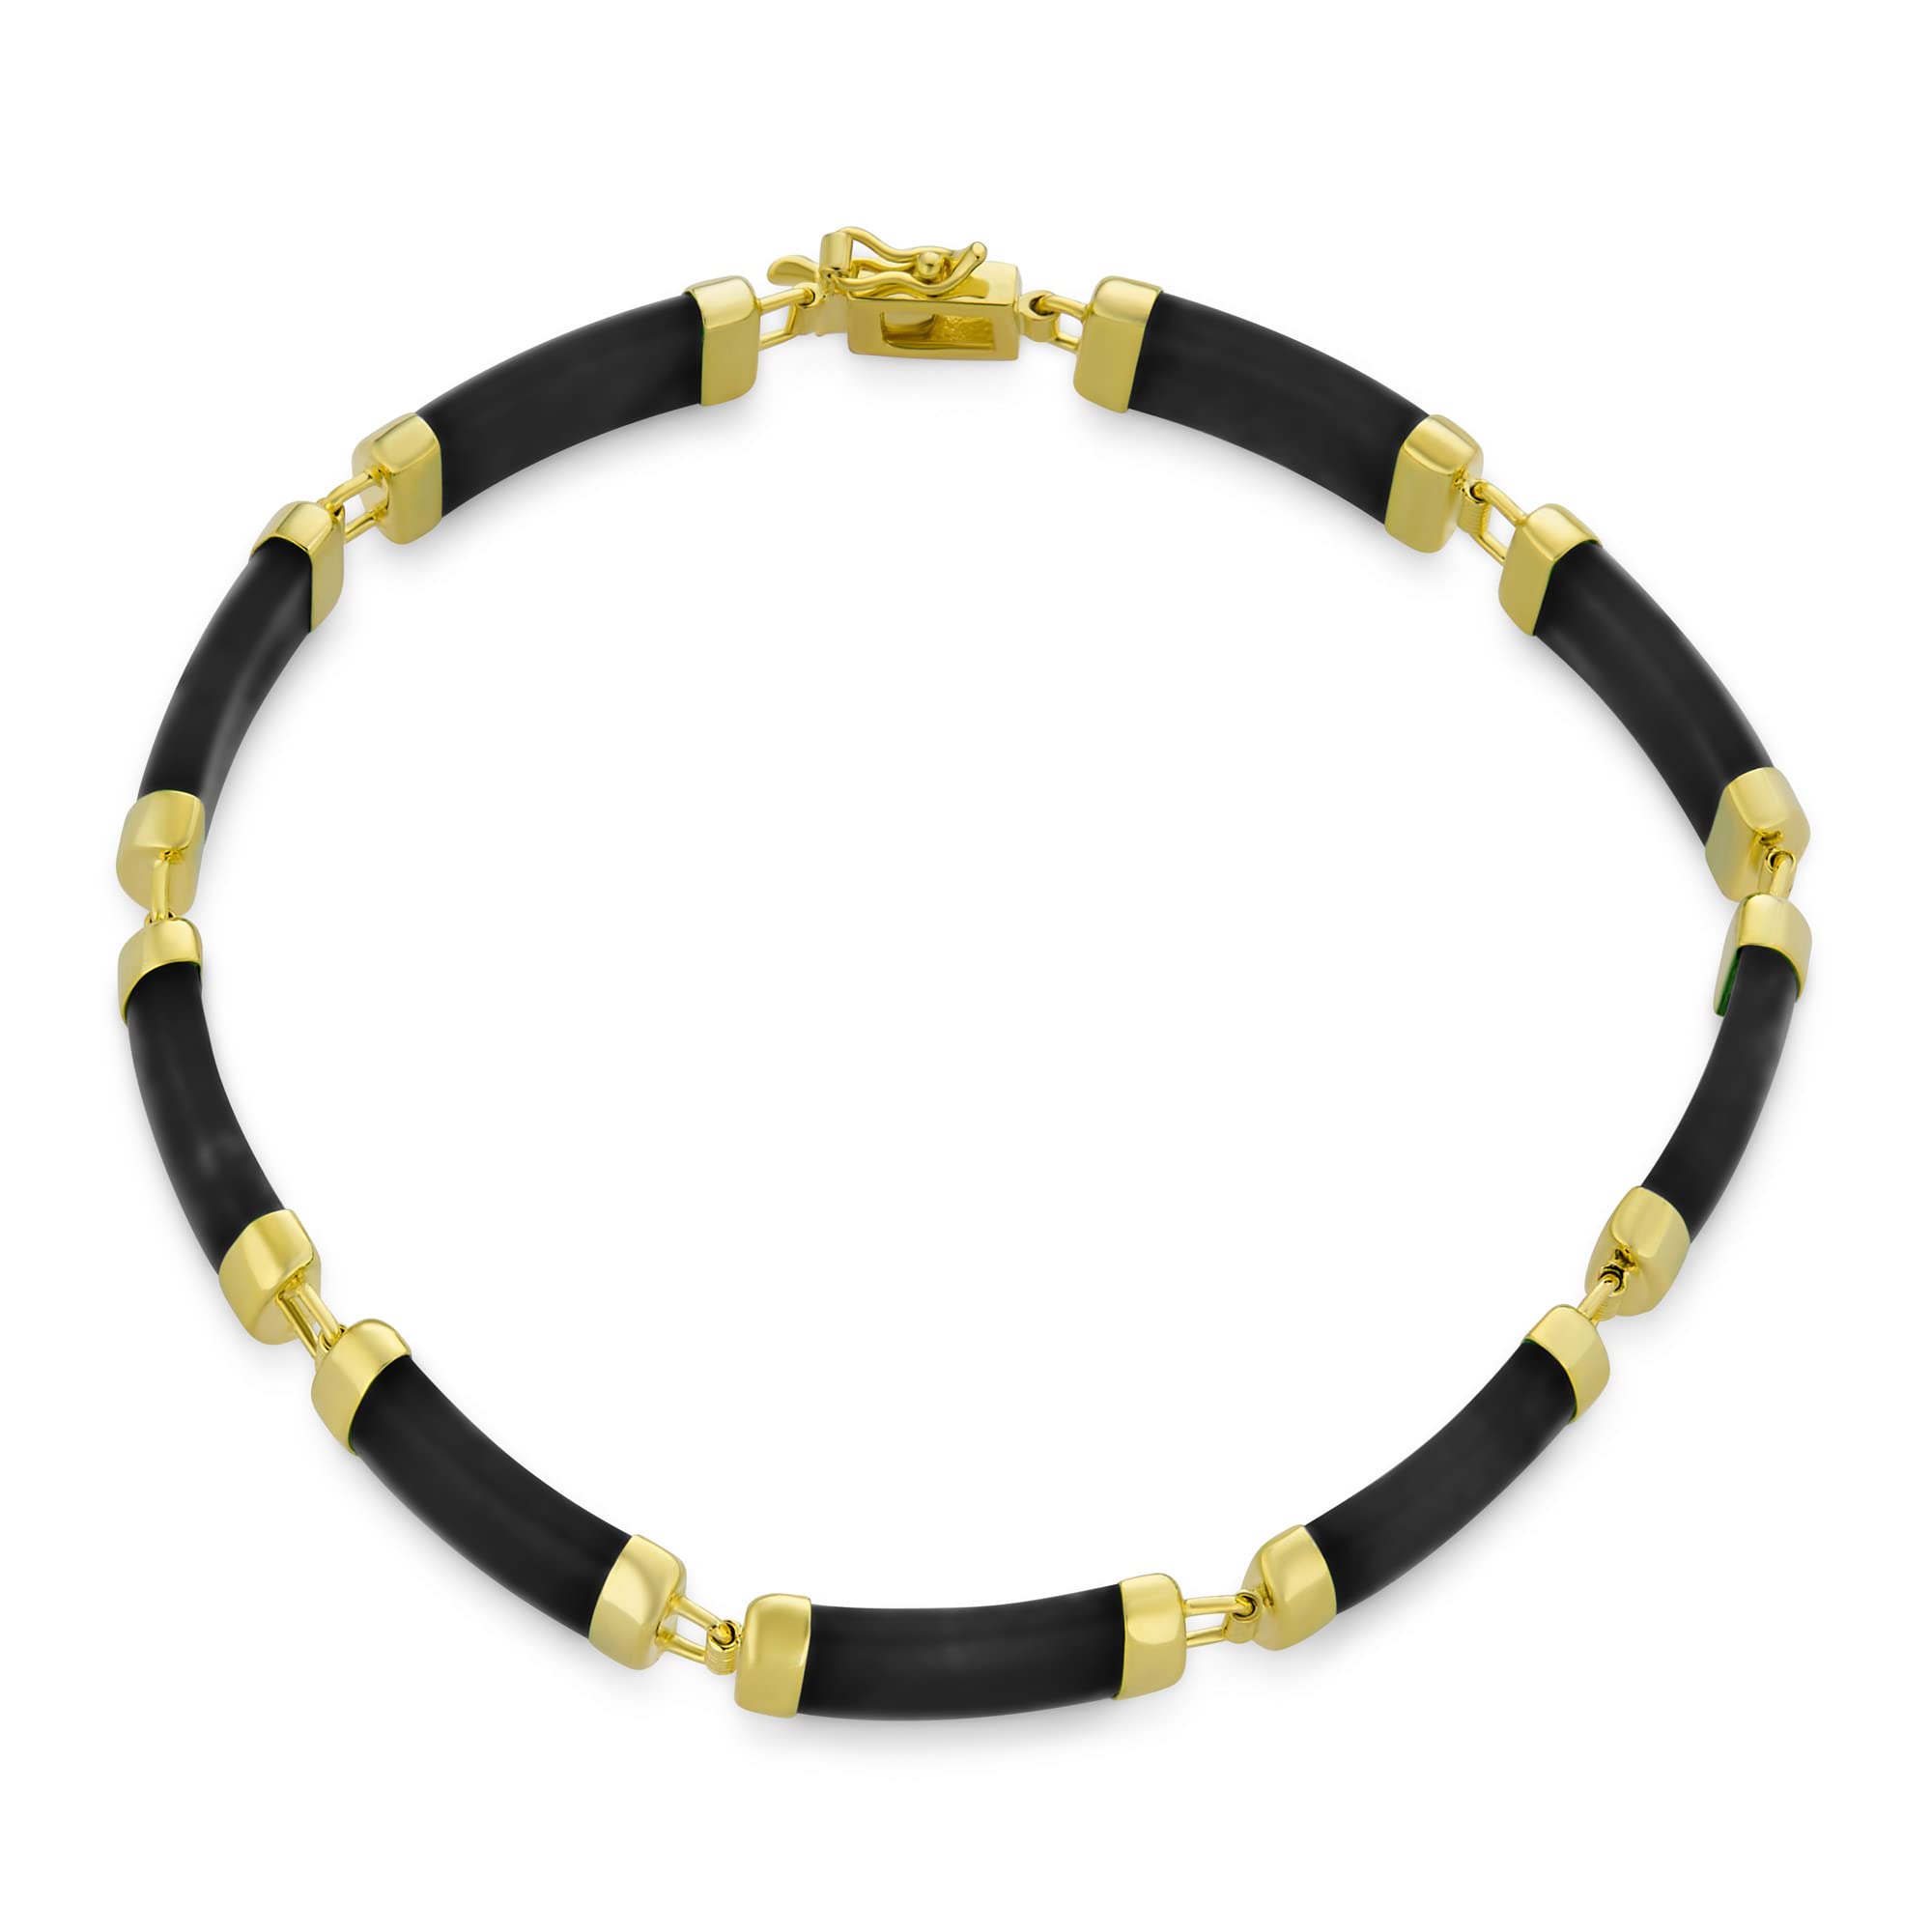 Asian Style Gemstone Black Onyx Genuine Multi Color Yellow Red White Green Jade Strand Contoured Tube Bar Link Bracelet For Women 14K Yellow Gold Plated .925 Sterling Silver 7.5 Inch